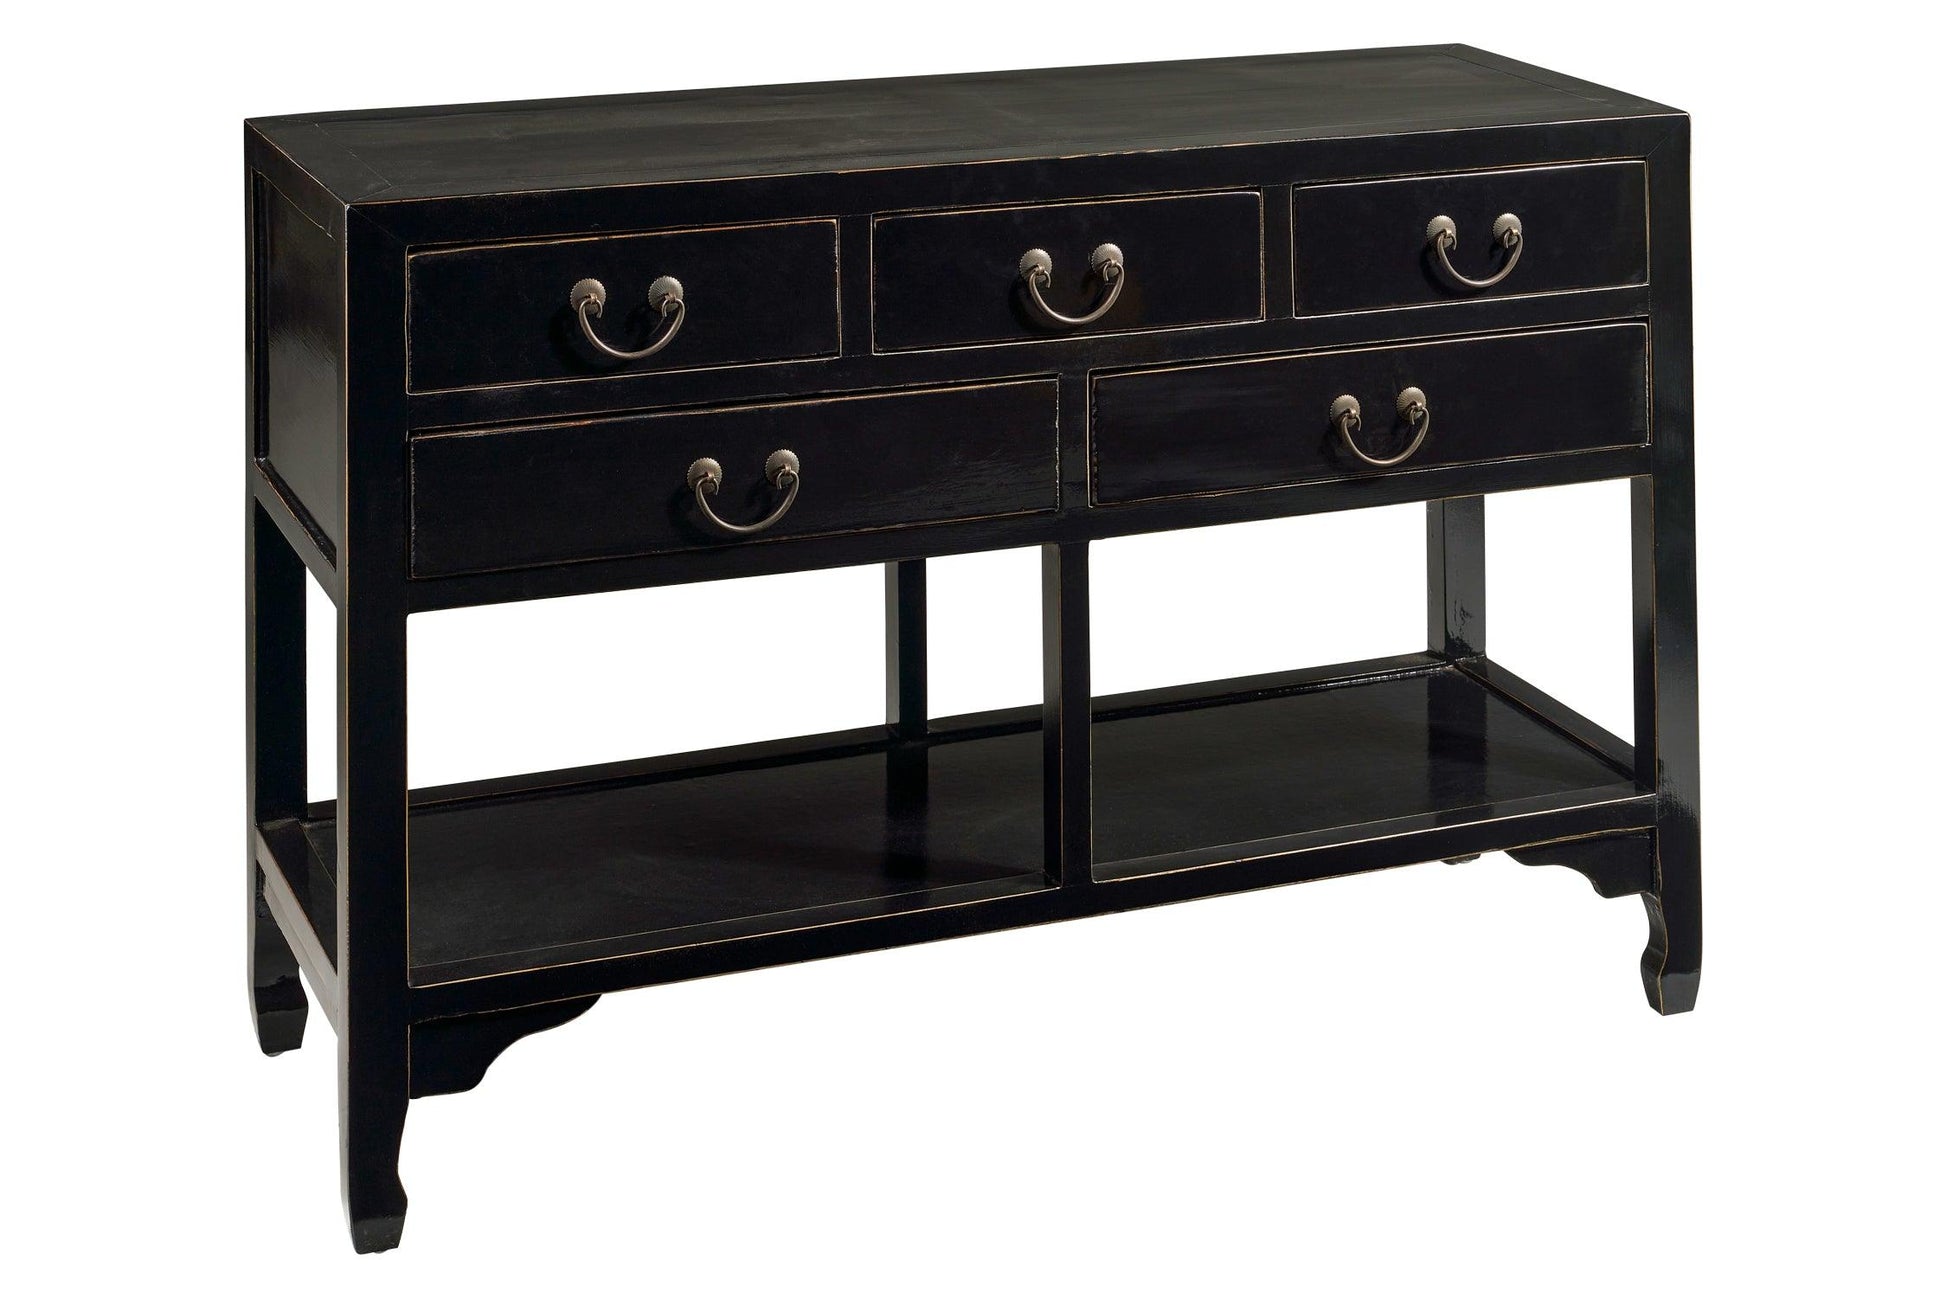 Consolle credenza cinese in Olmo lacca nera 5c - lapagoda.net